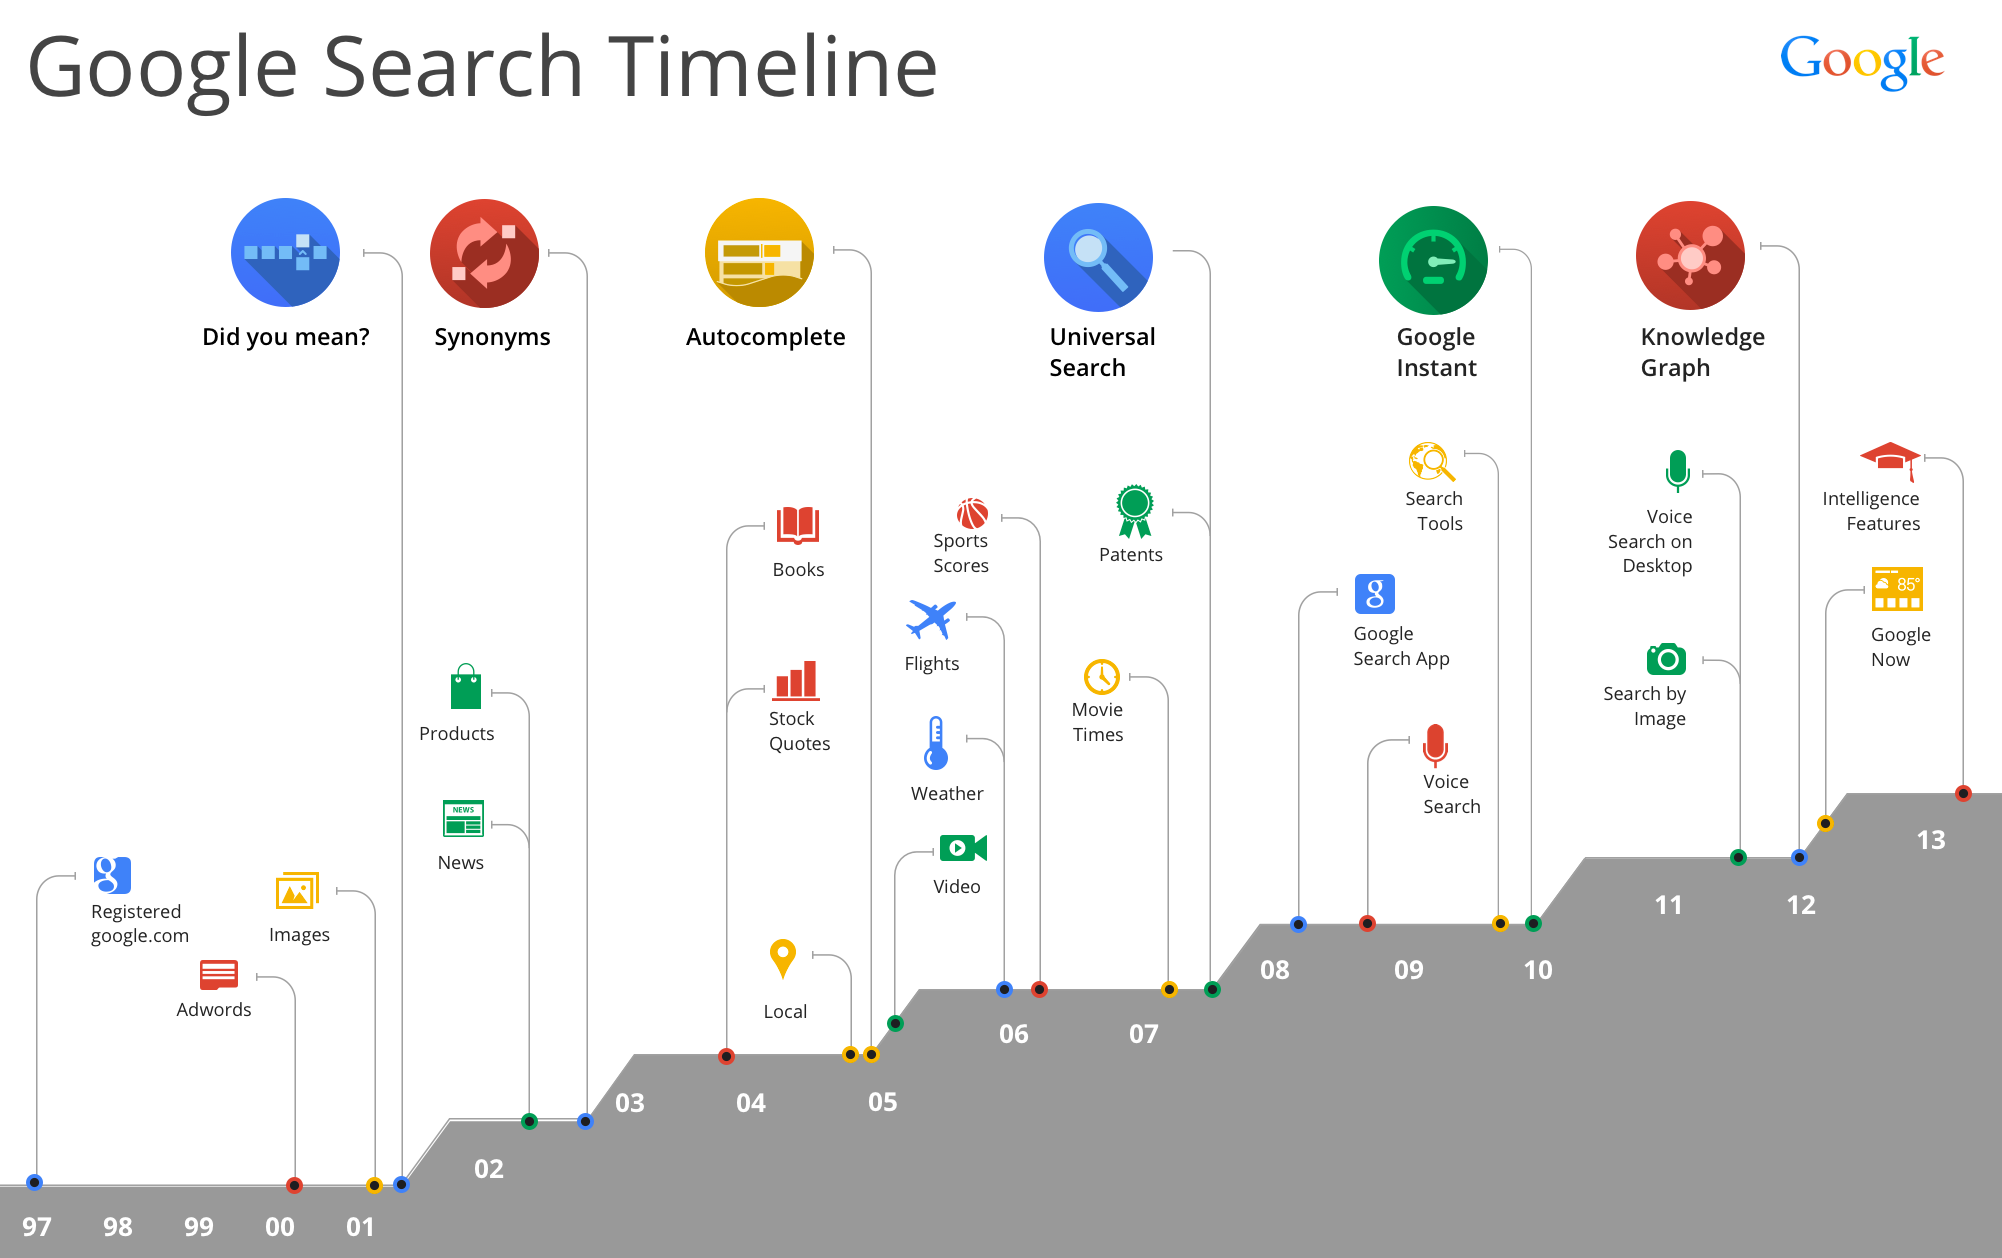 Google search history timeline from 1997 to 2013: infographic